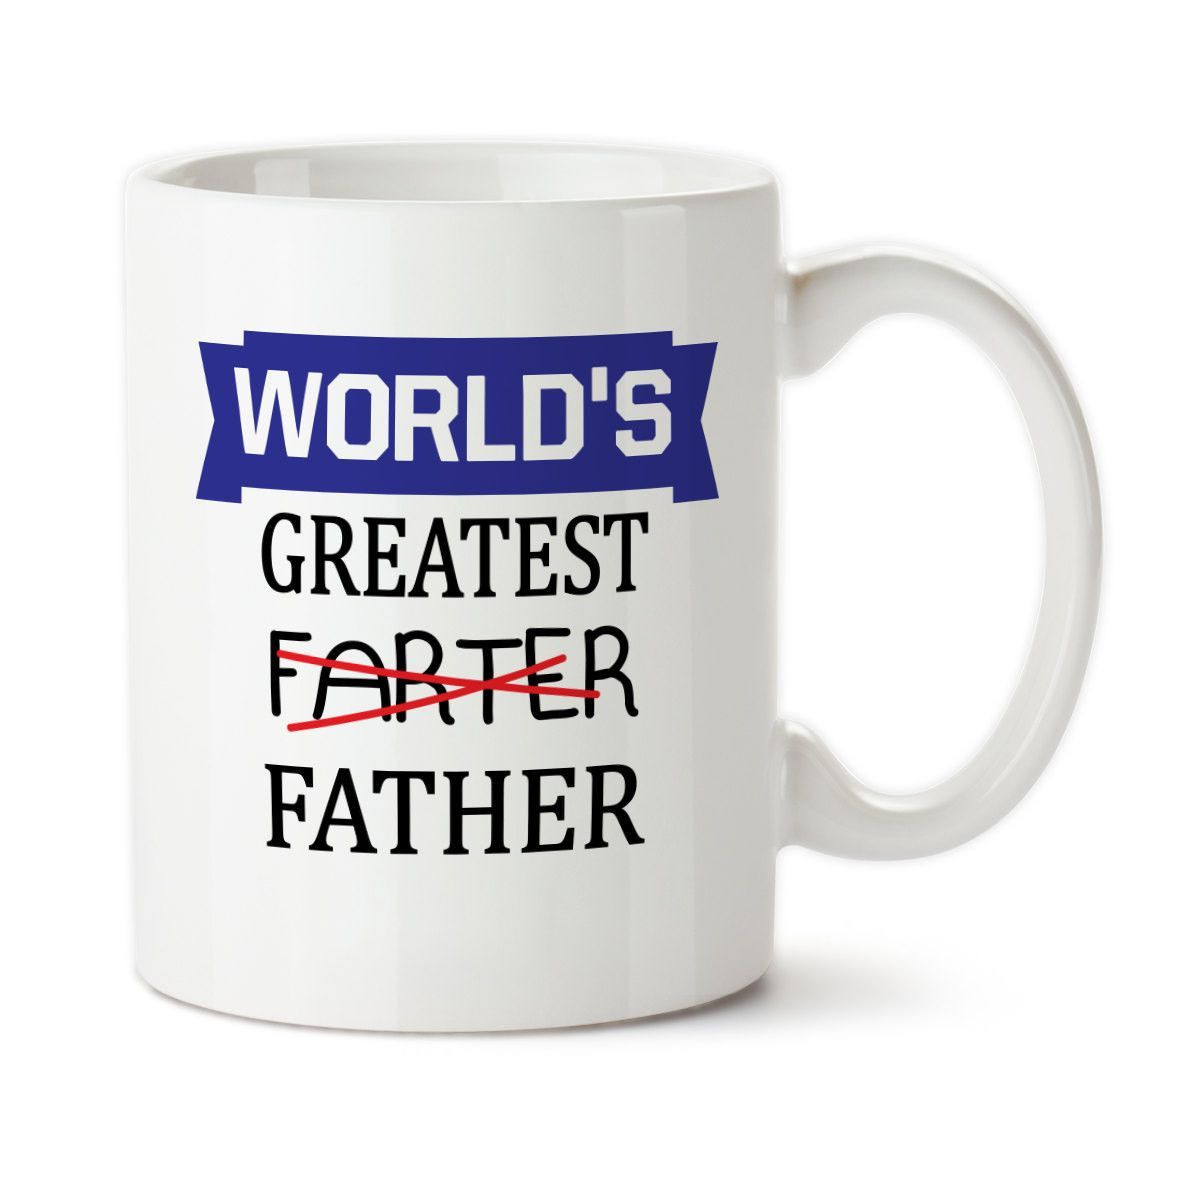 Funny Birthday Gifts For Dad
 World s Greatest Farter Father Funny mug Father s Day